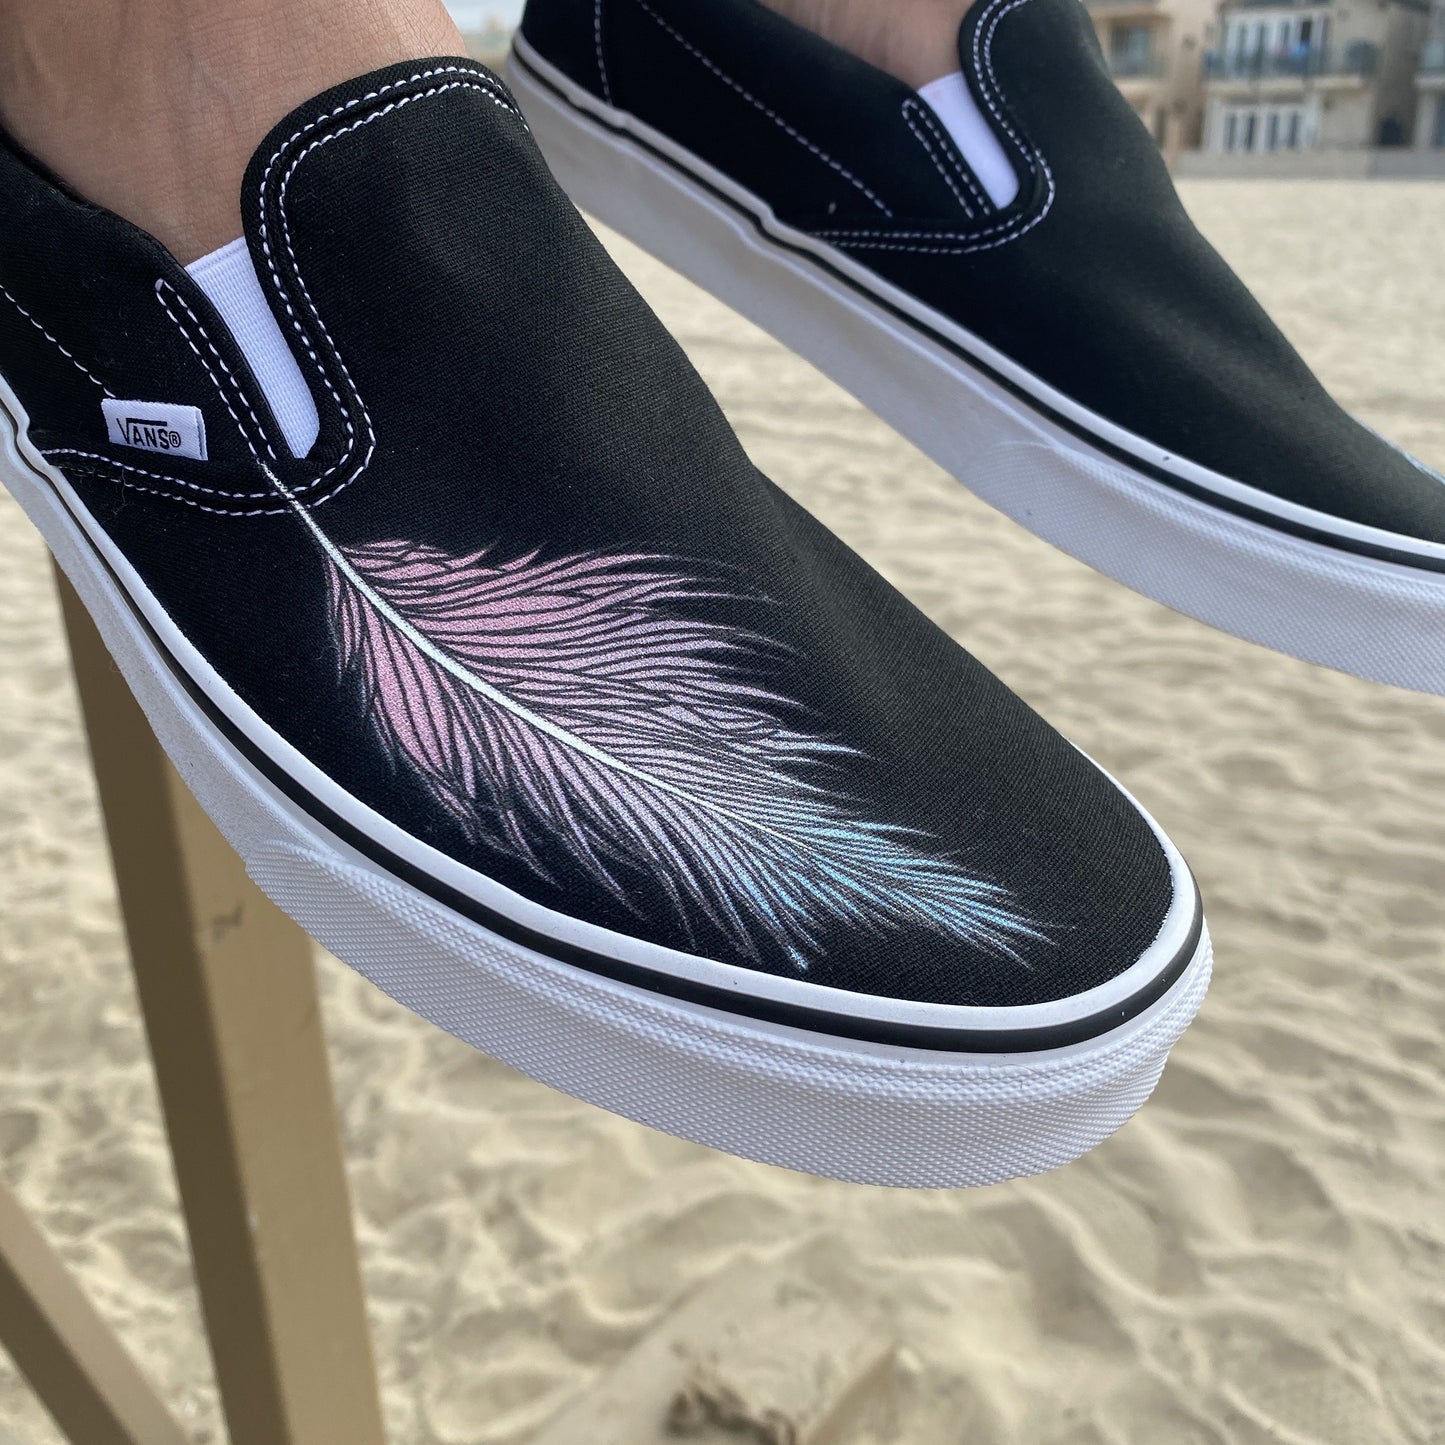 Kids Shoes - Feather Black Slip Ons